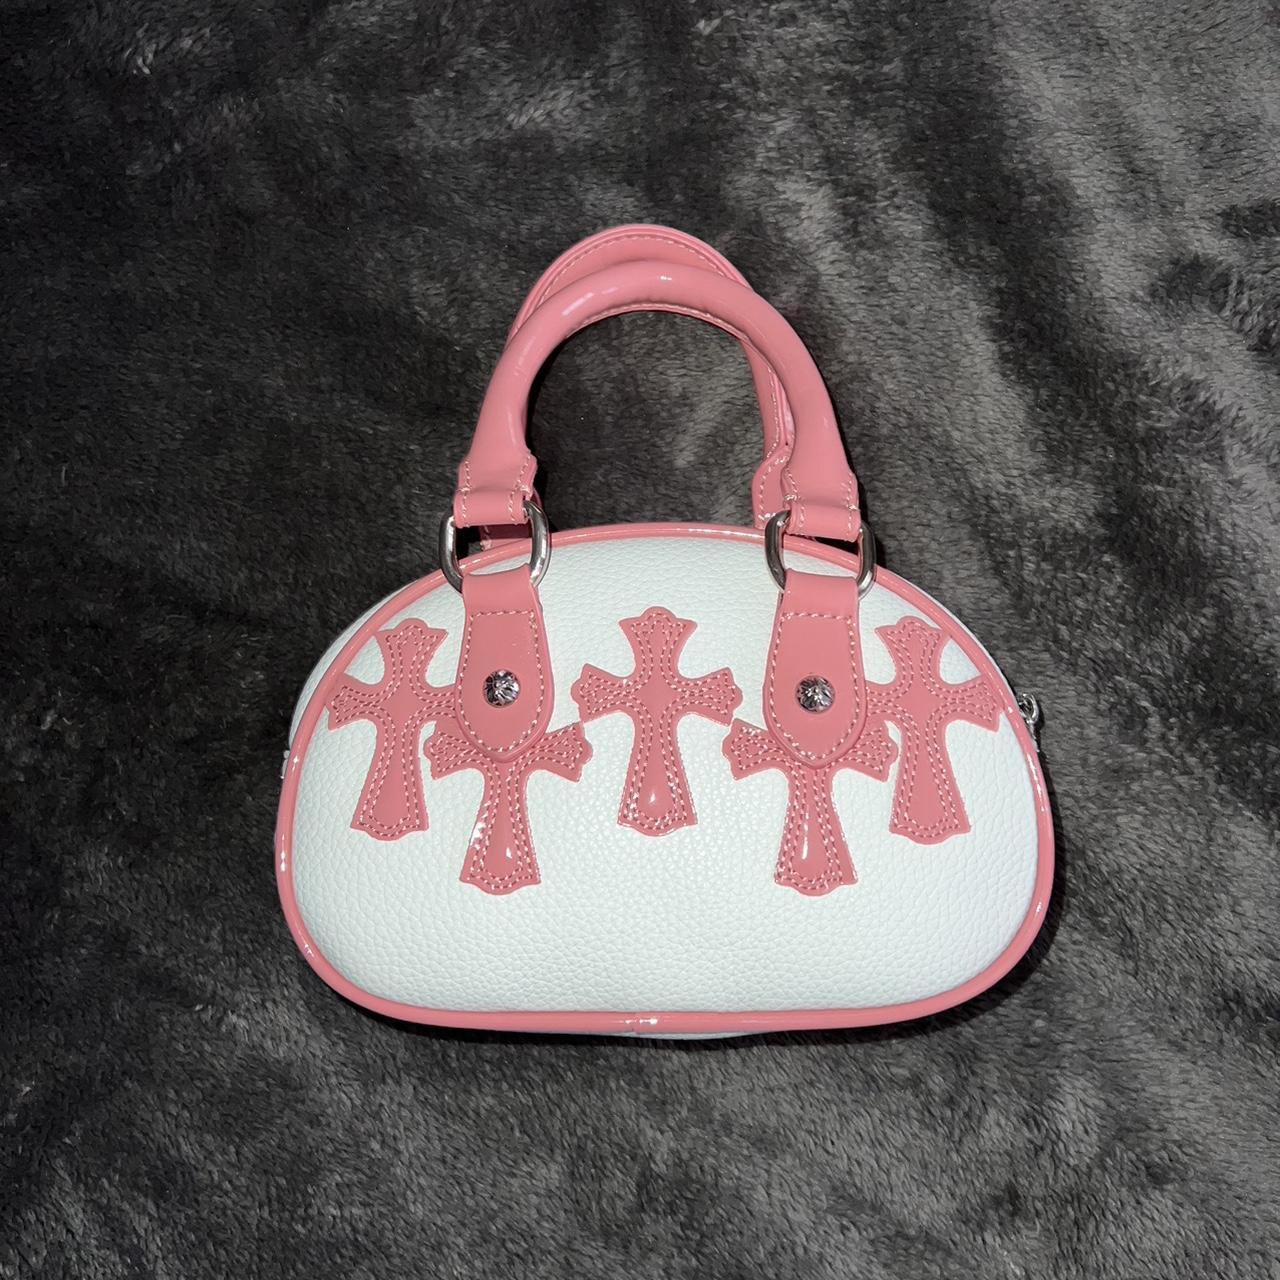 Women's Pink and White Bag